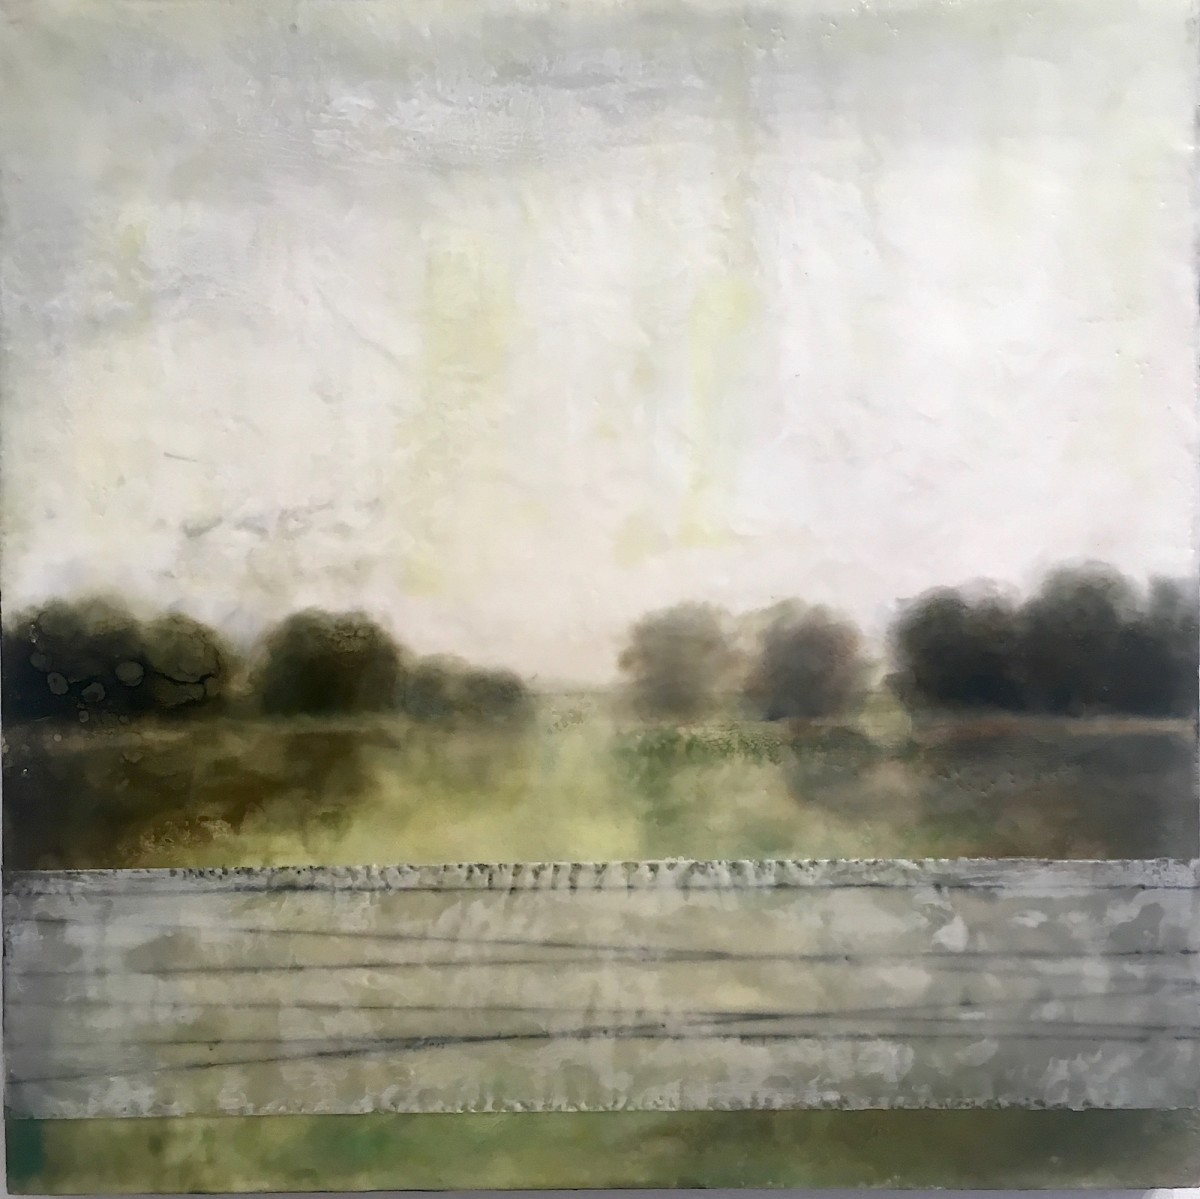 Spring Field by Giselle Gautreau  Image: Spring Field
Encaustic on panel
24x24"
private collection